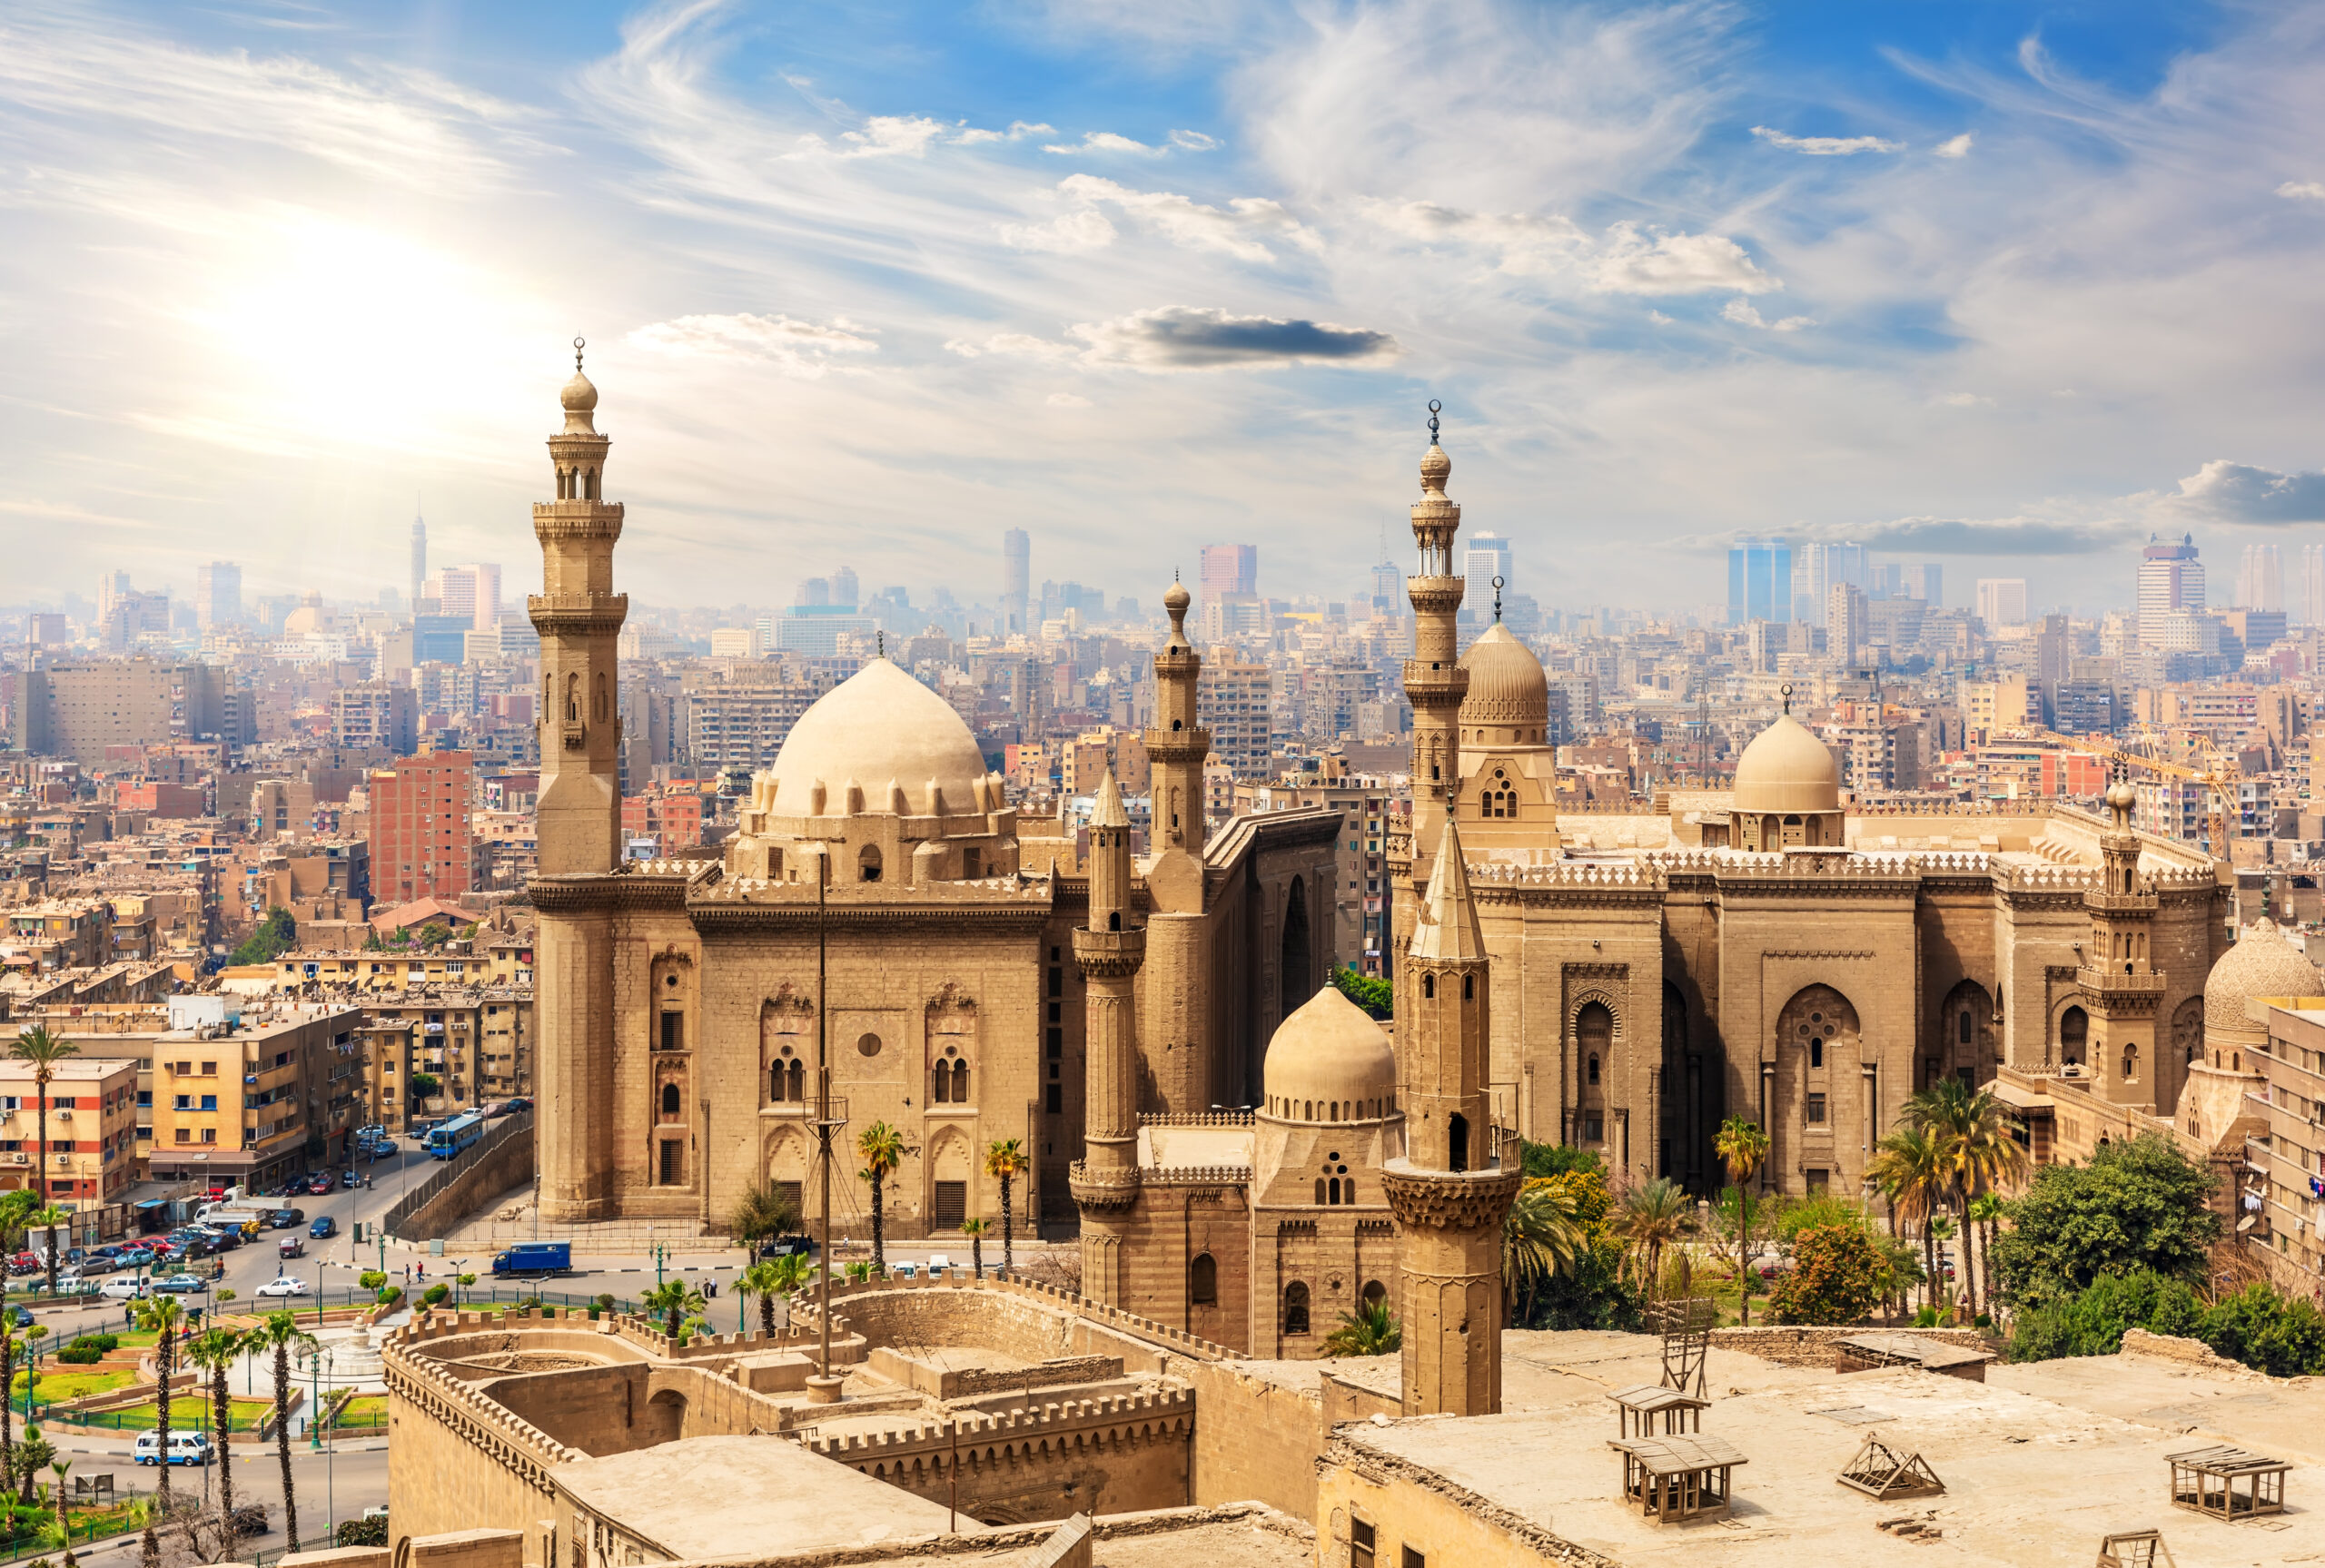 Wonderful view of The Mosque-Madrassa of Sultan Hassan from the Citadel, Cairo, Egypt.